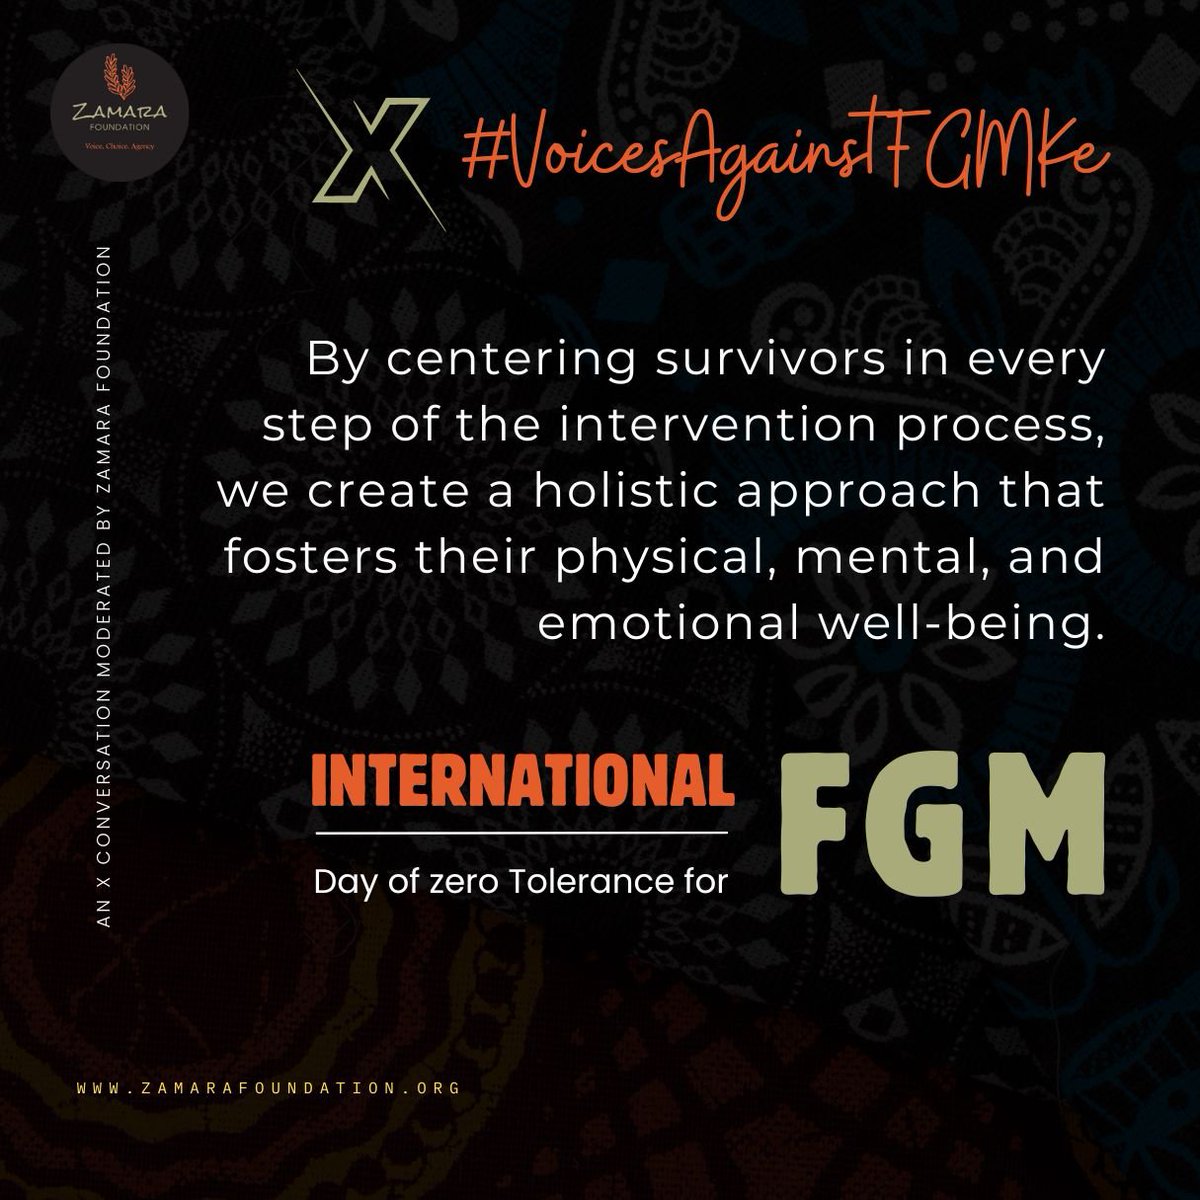 Support the development of policies and legislation, and ensure adequate resources, to end female genital mutilation #VoicesAgainstFGMKe
#ZamaraVoices @Zamara_fdn